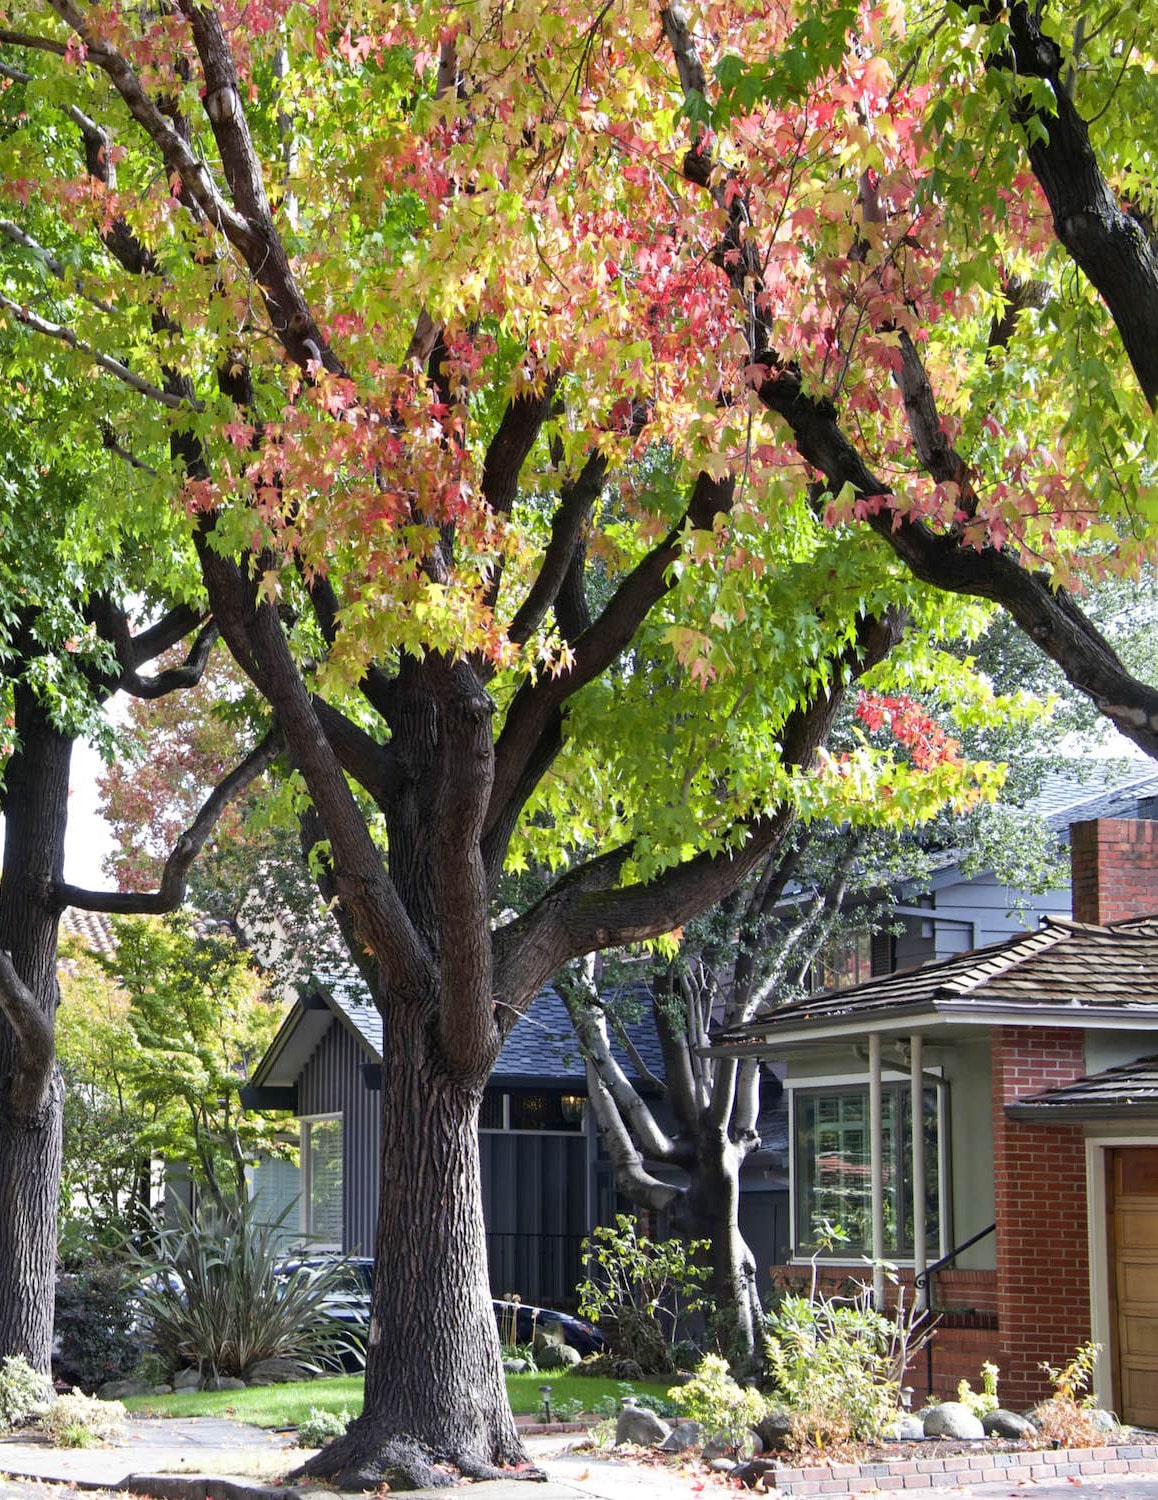 A tree-lined neighborhood street with an eclectic array of houses